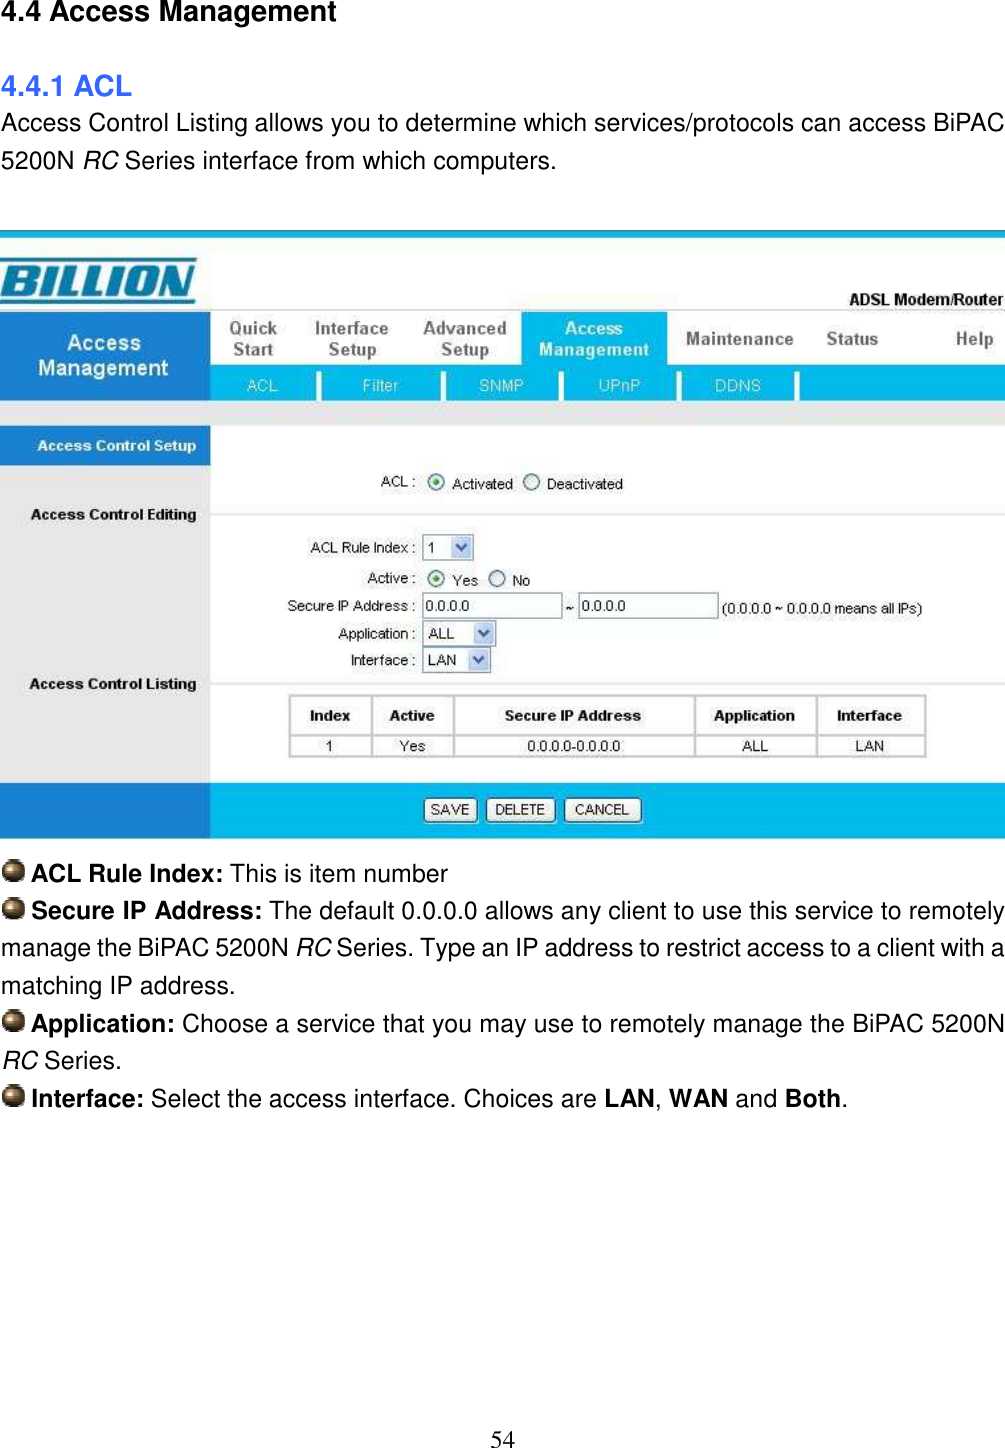 54 4.4 Access Management 4.4.1 ACL Access Control Listing allows you to determine which services/protocols can access BiPAC 5200N RC Series interface from which computers.    ACL Rule Index: This is item number  Secure IP Address: The default 0.0.0.0 allows any client to use this service to remotely manage the BiPAC 5200N RC Series. Type an IP address to restrict access to a client with a matching IP address.  Application: Choose a service that you may use to remotely manage the BiPAC 5200N RC Series.  Interface: Select the access interface. Choices are LAN, WAN and Both.        